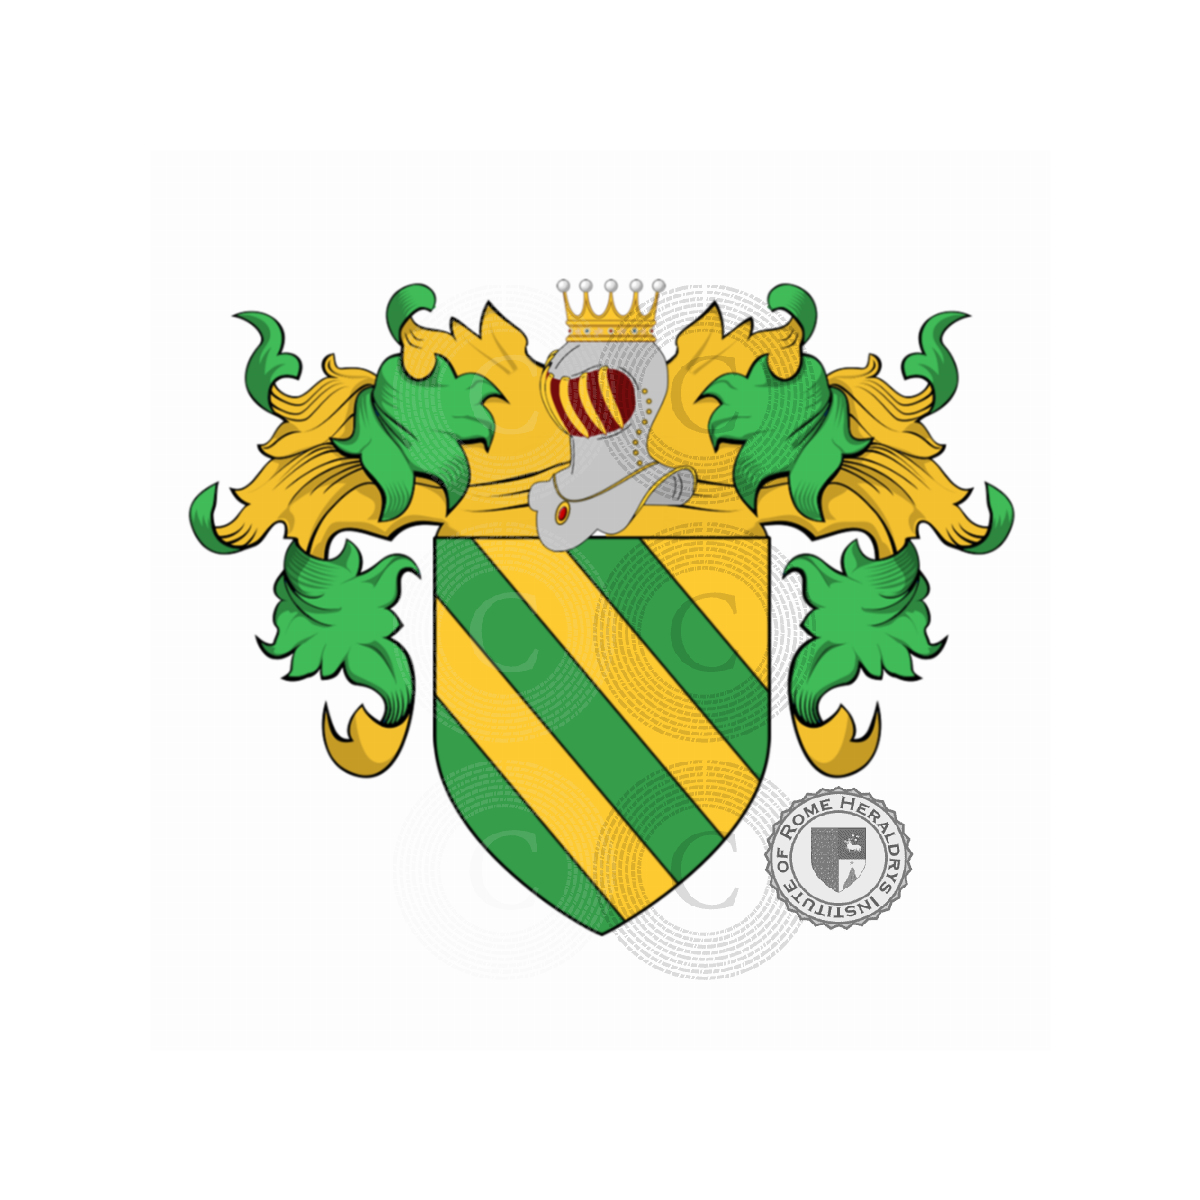 Coat of arms of familyCosta